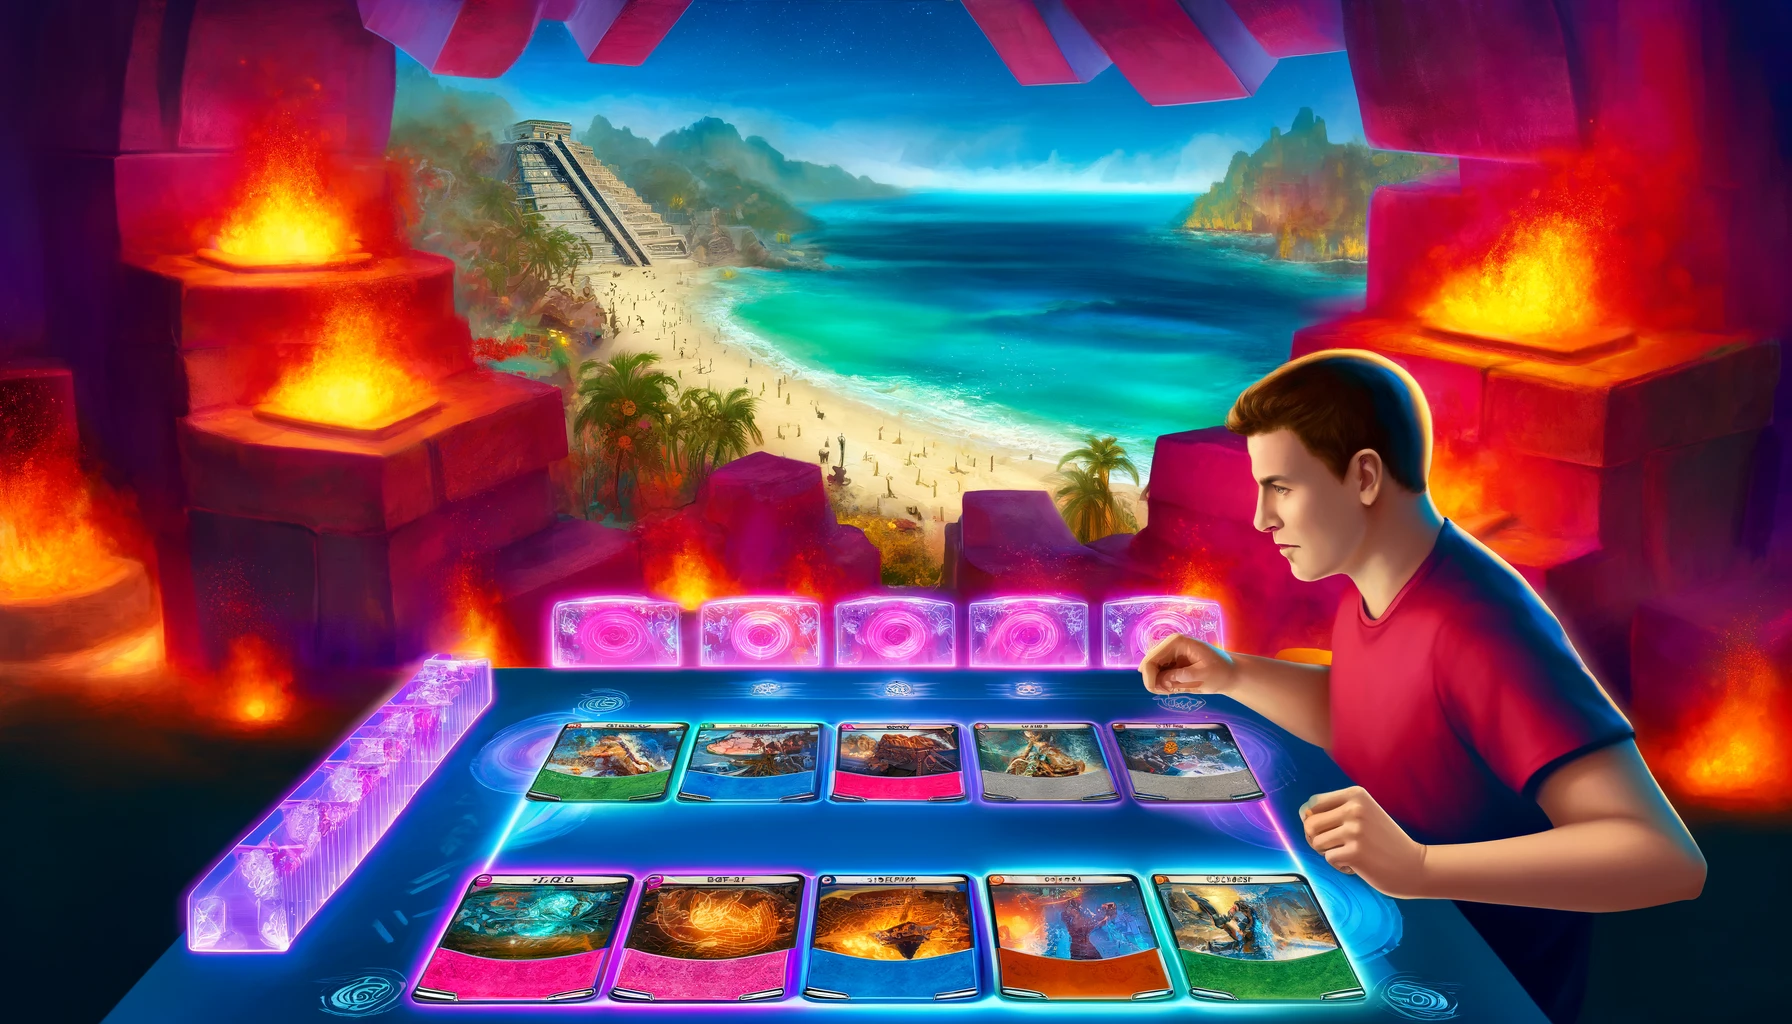 Intense Marvel Snap duel between two players, surrounded by Cancun's mystical ruins and enchanted waters, depicting tension and decision-making.